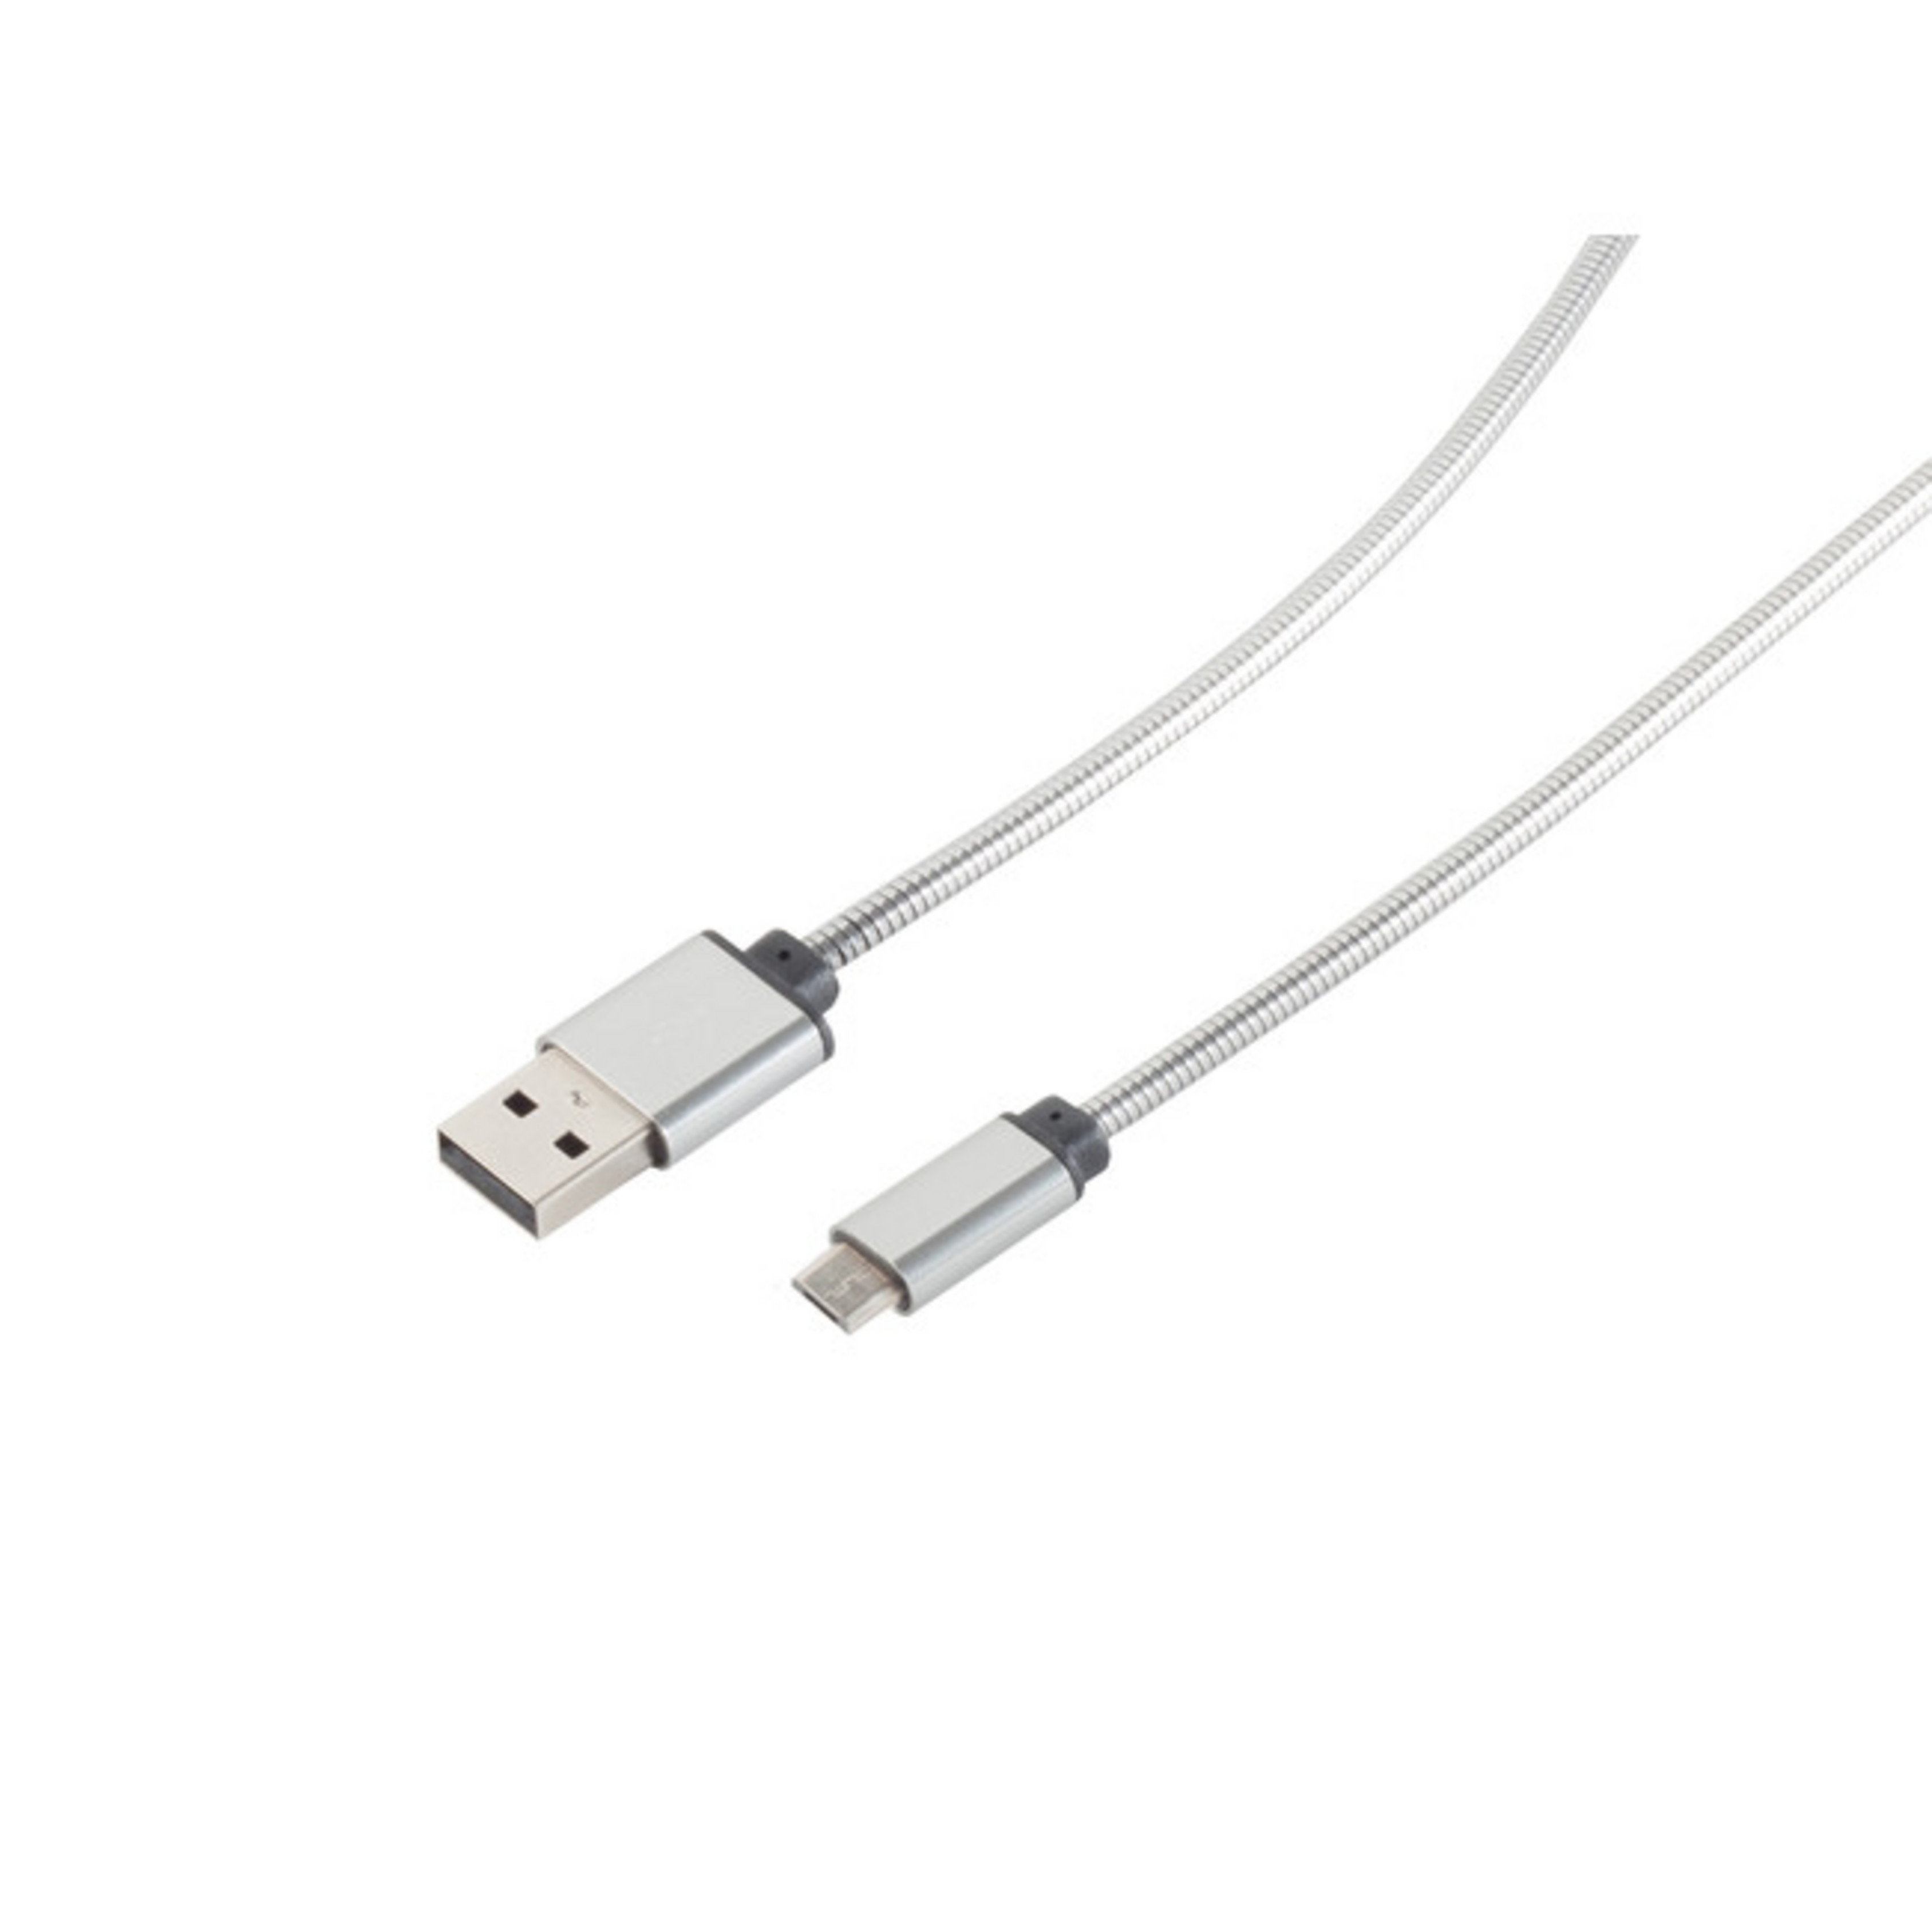 Kabel A/ MAXIMUM Lade-Sync S/CONN micro, USB Steel USB Silber Kabel USB CONNECTIVITY 1m